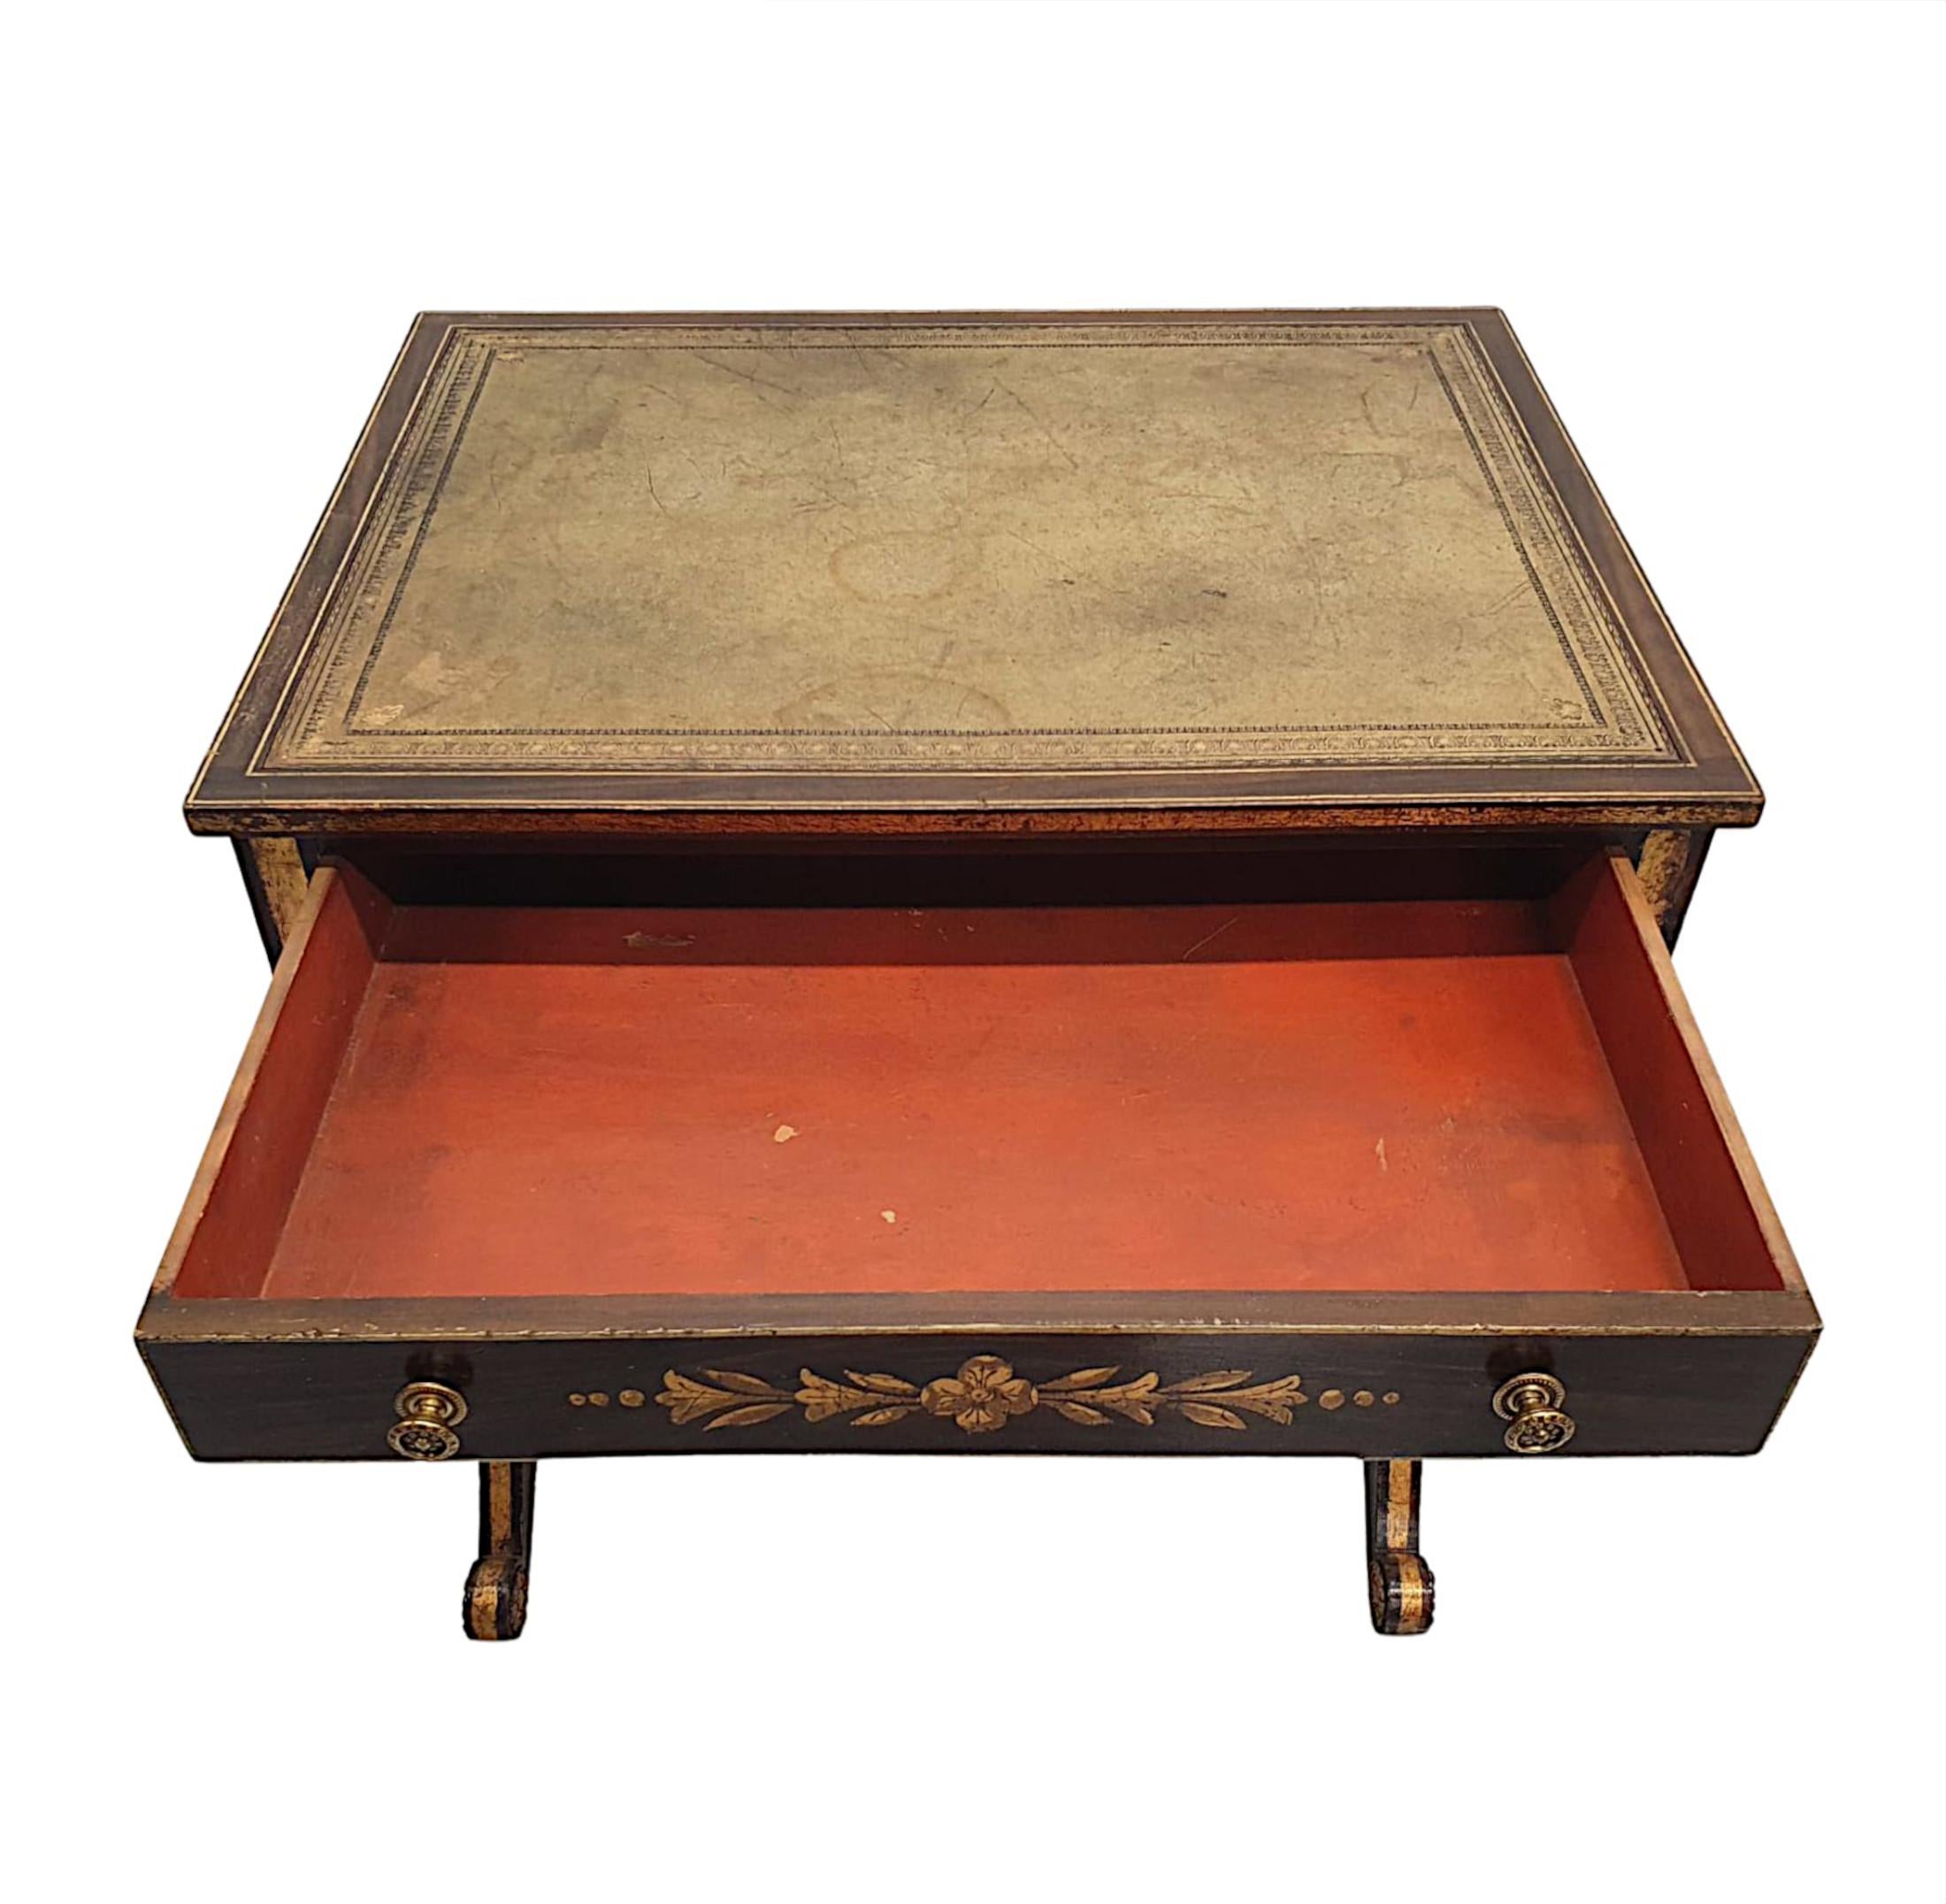 Brass Rare Early 19th Century American Baltimore Federal Parcel Gilt Writing Desk For Sale